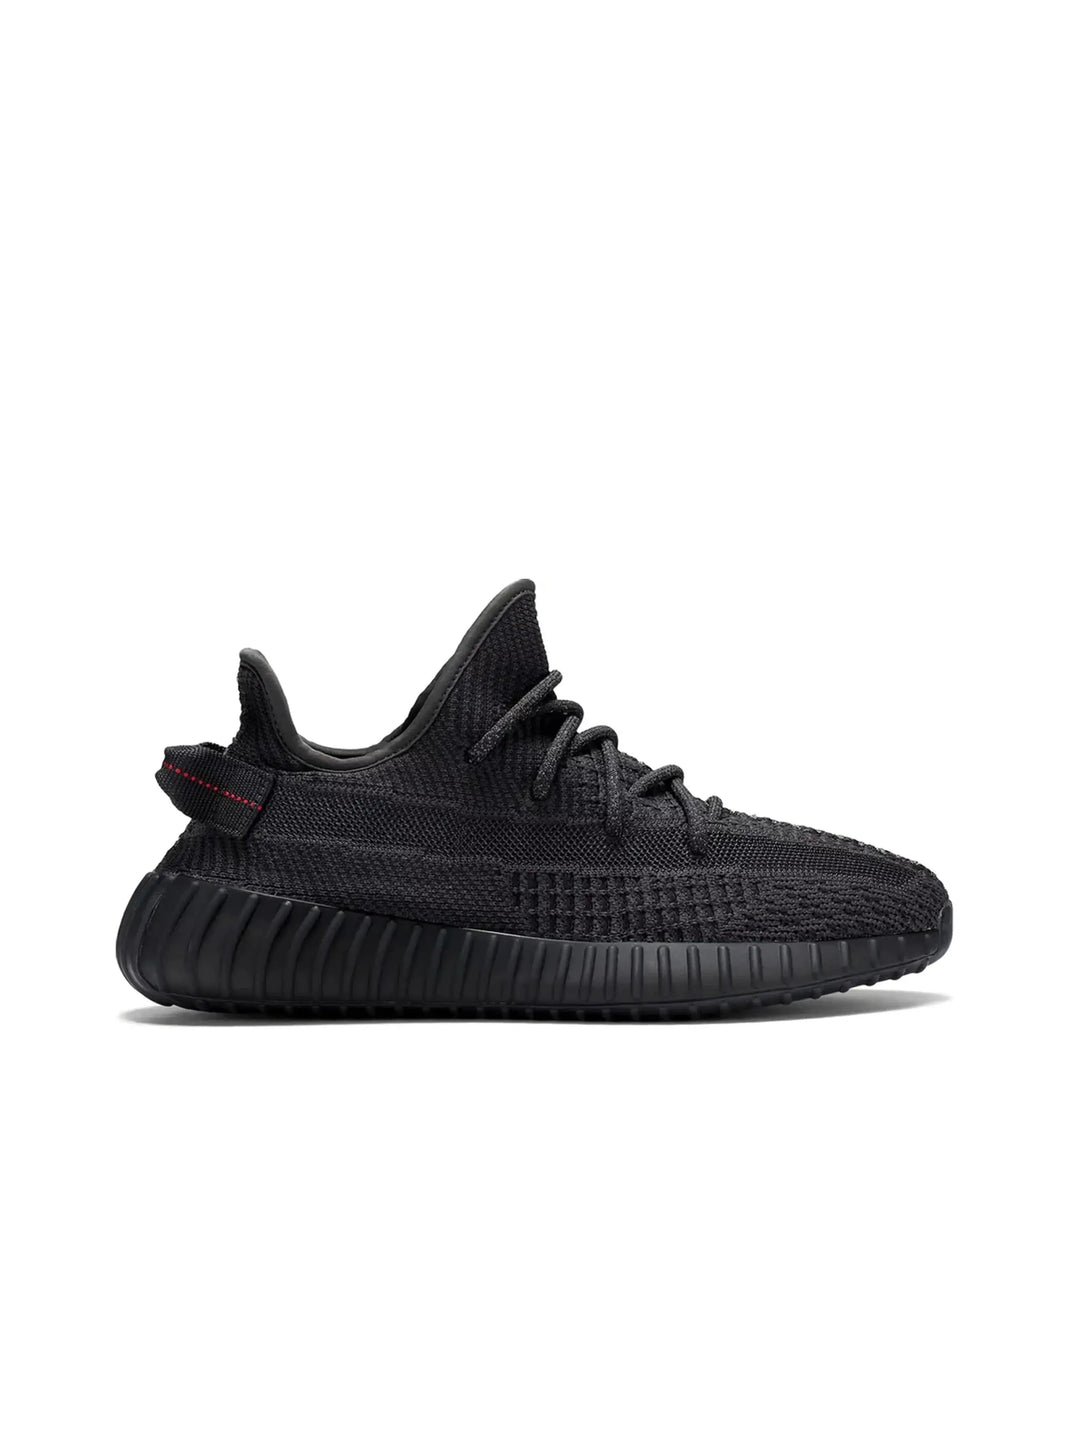 adidas Yeezy Boost 350 V2 Black (Non-Reflective) in Auckland, New Zealand - Shop name